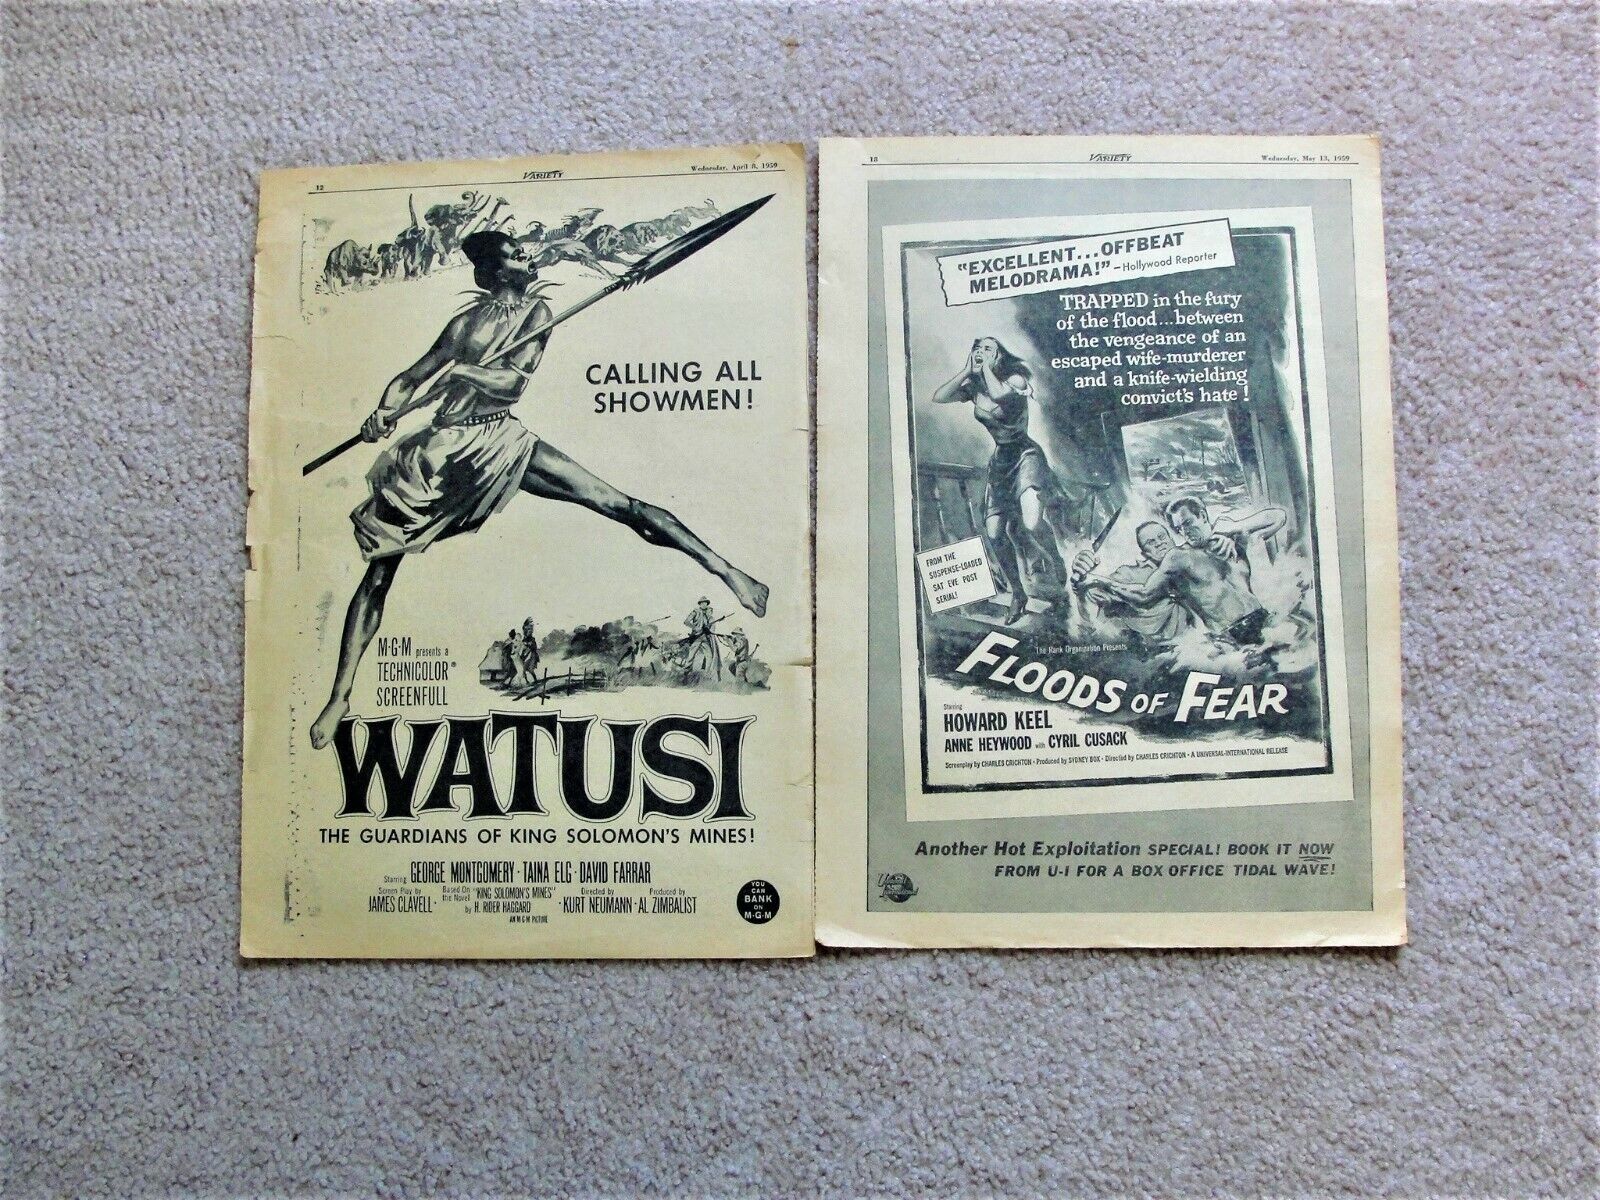 Primary image for Watusi & Floods of Fear (2) Pages Movie Ads from Variety Newspaper 1959.    